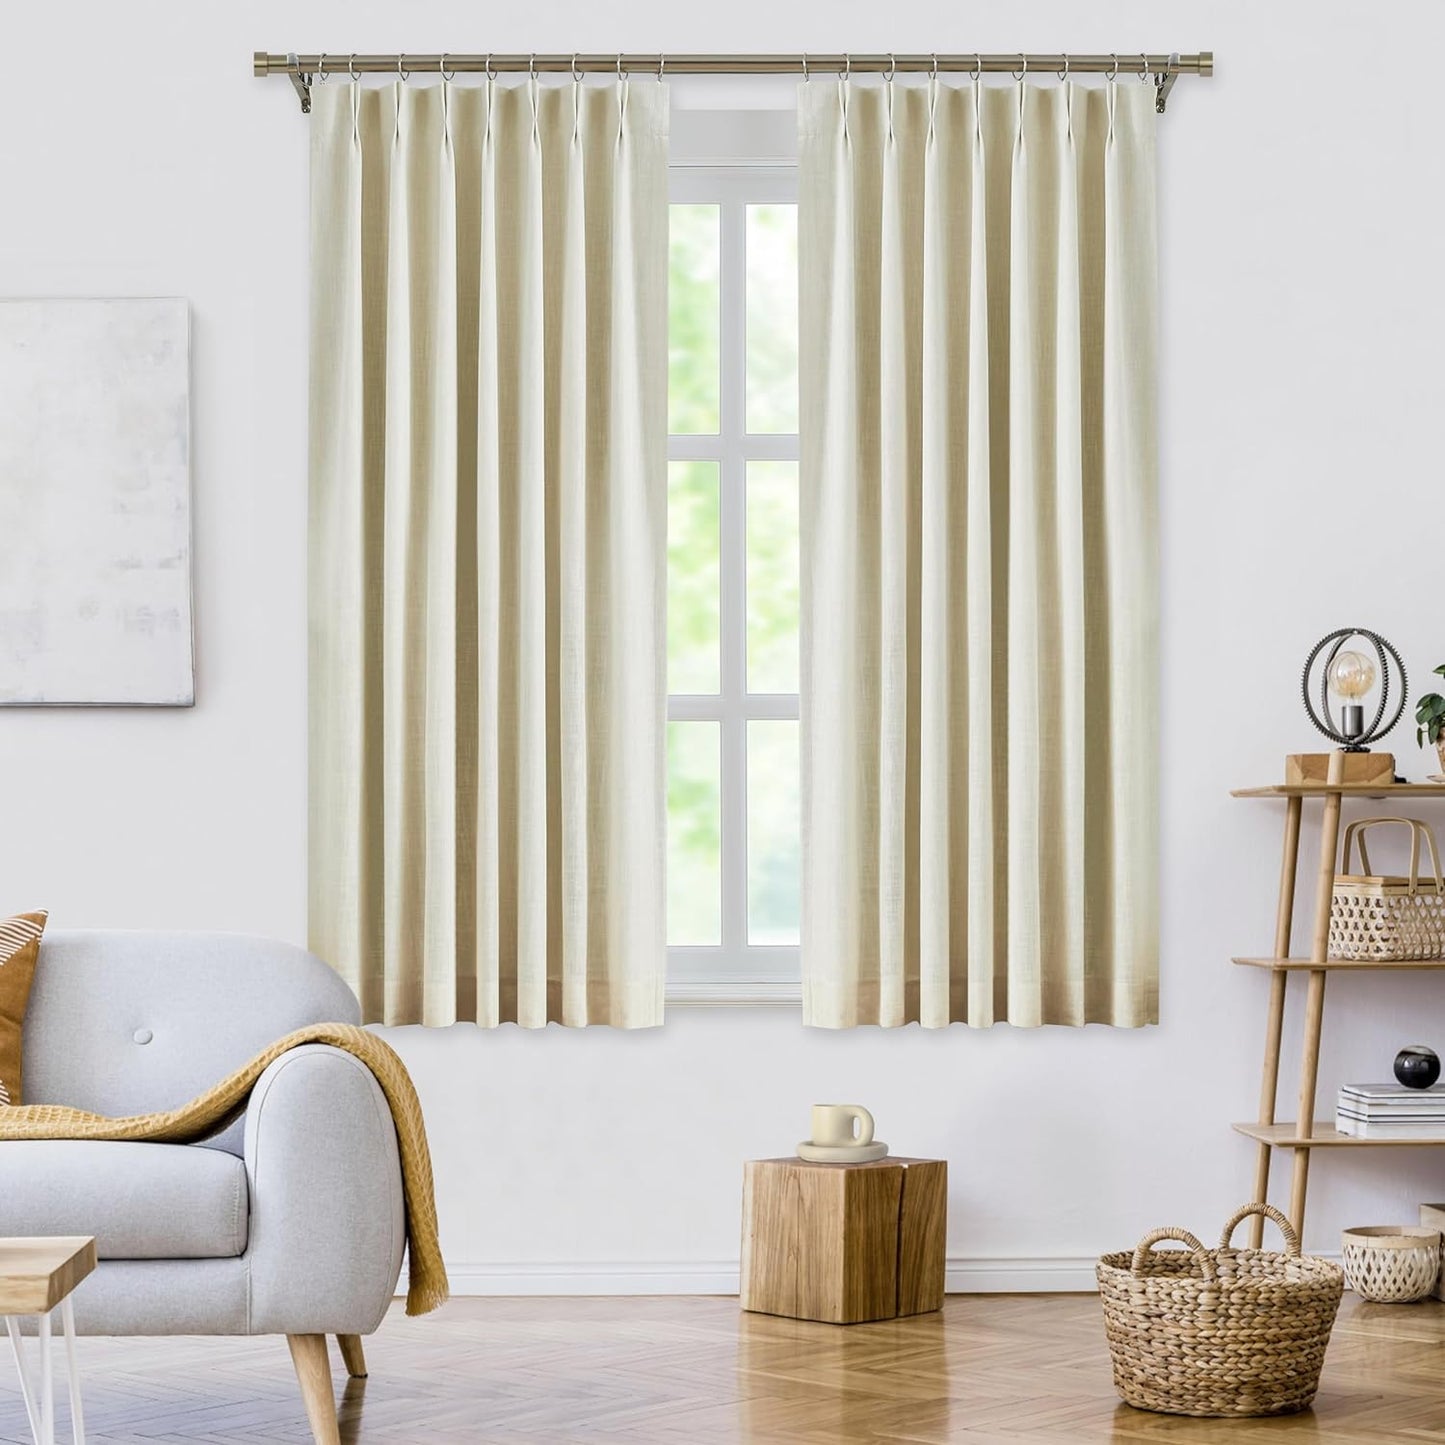 WEST LAKE Extra Long 9 Ft Bailey Linen Pinch Pleat Full Blackout Curtains 108 Inches Length,Natural Pinch Pleated Panels with Back Tabs,Rustic Window Treatment Bedroom Living Room,40"Wx108"Lx2,Natural  WEST LAKE Ivory Pearl 40"X63"X2 